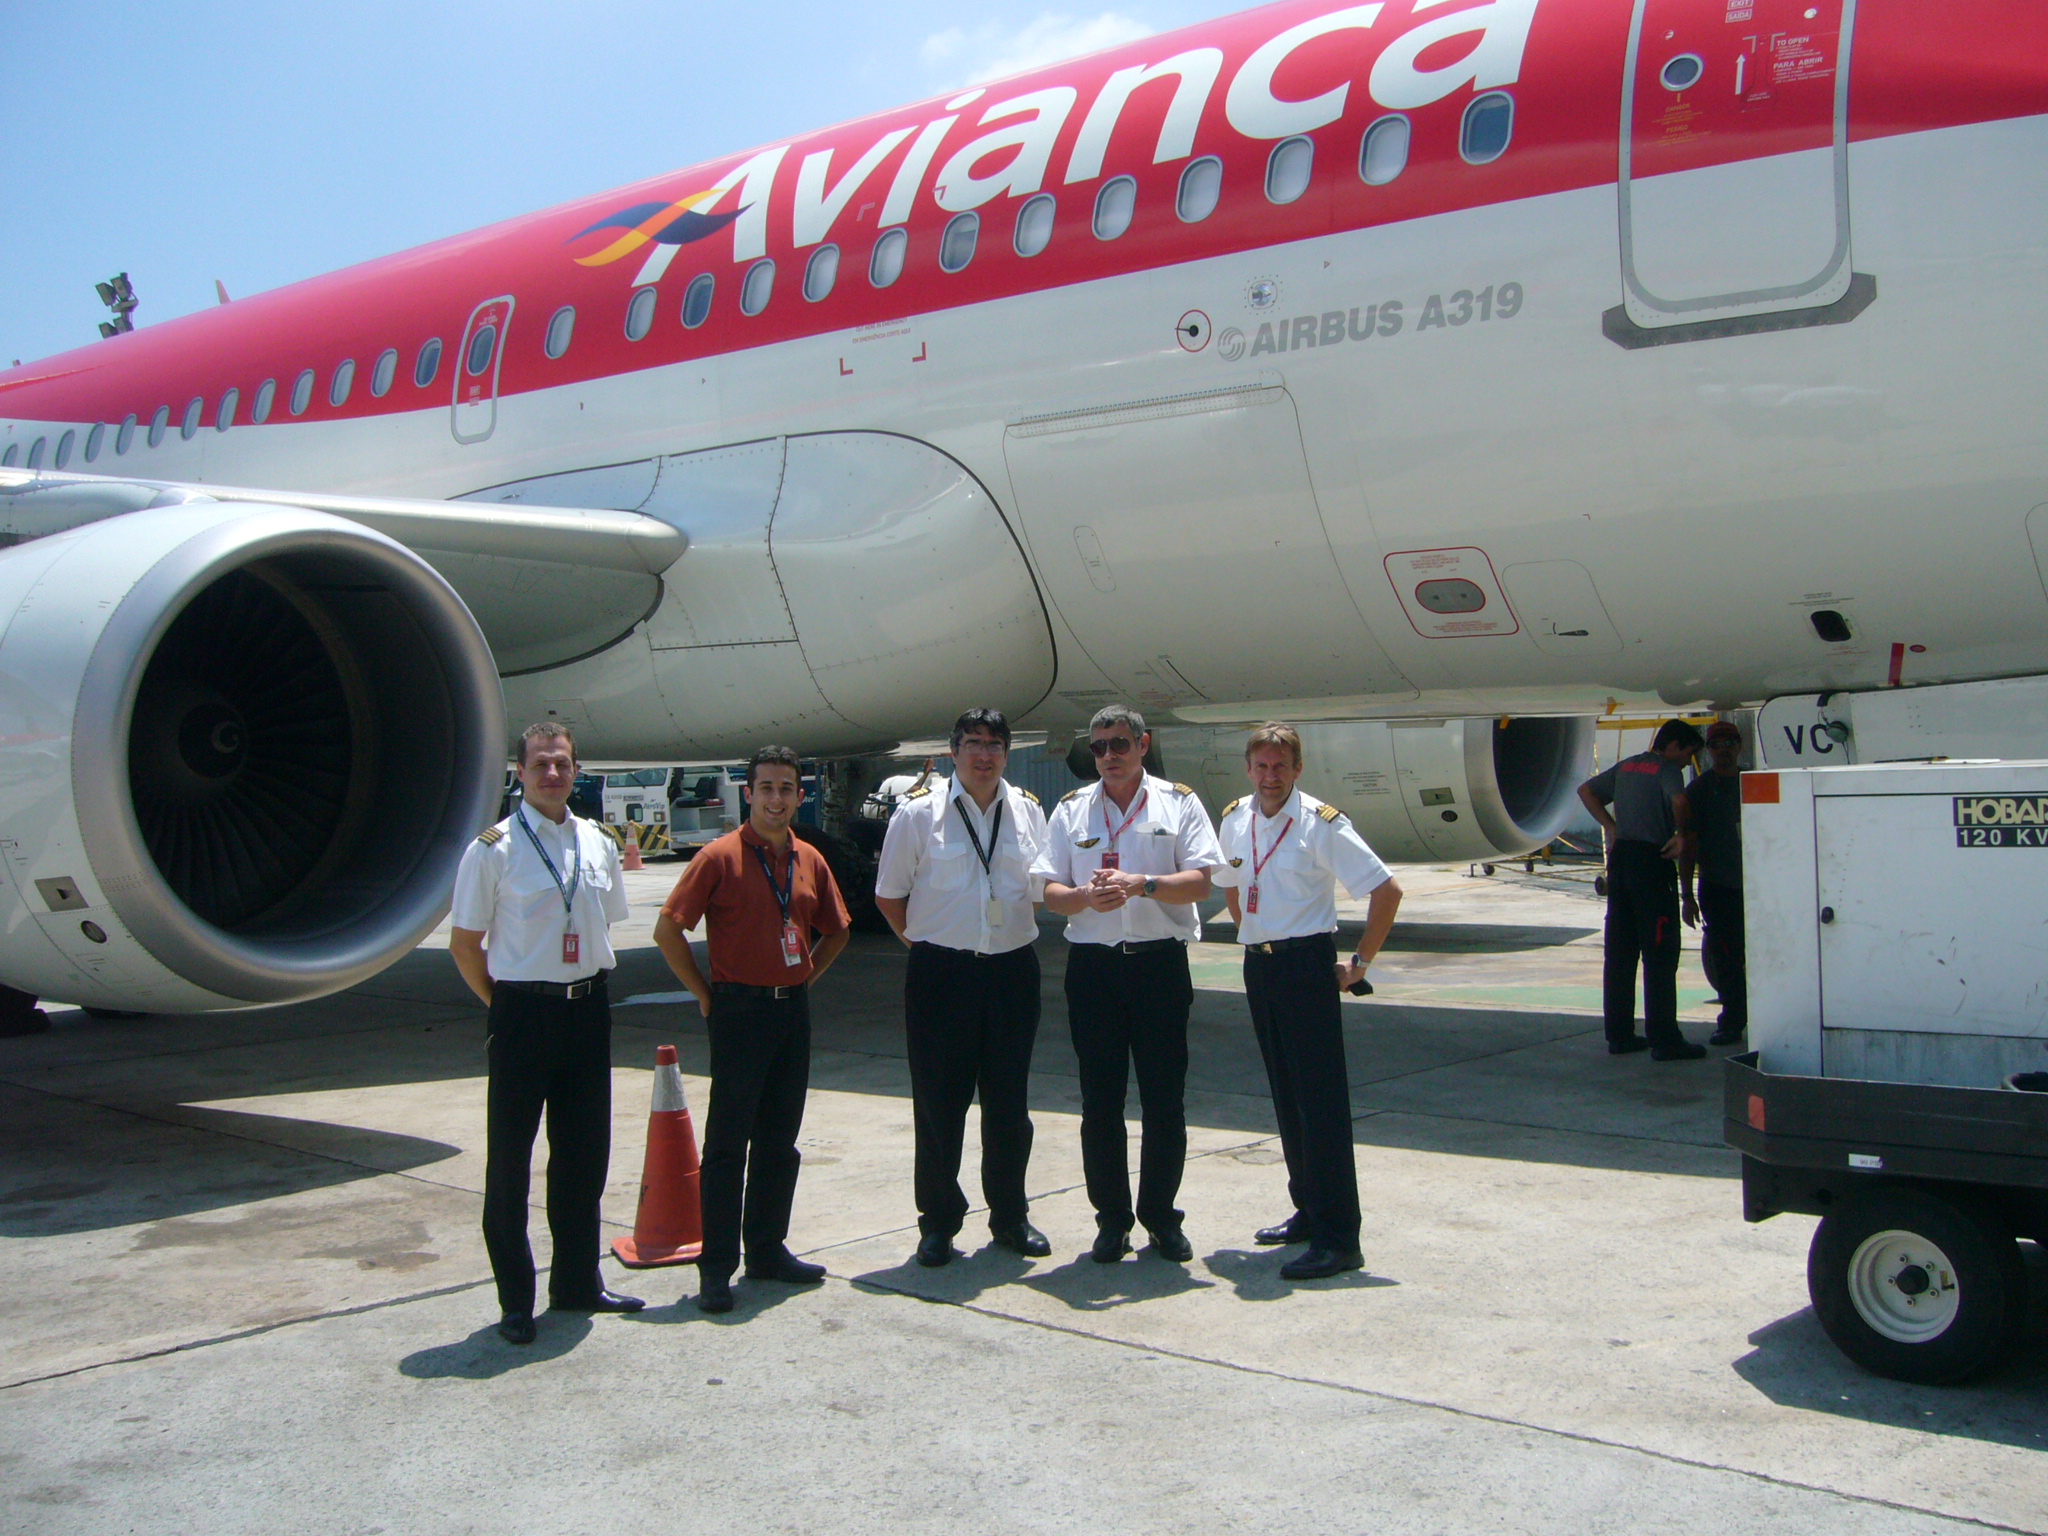 several pilots standing in front of an airplane on the tarmac